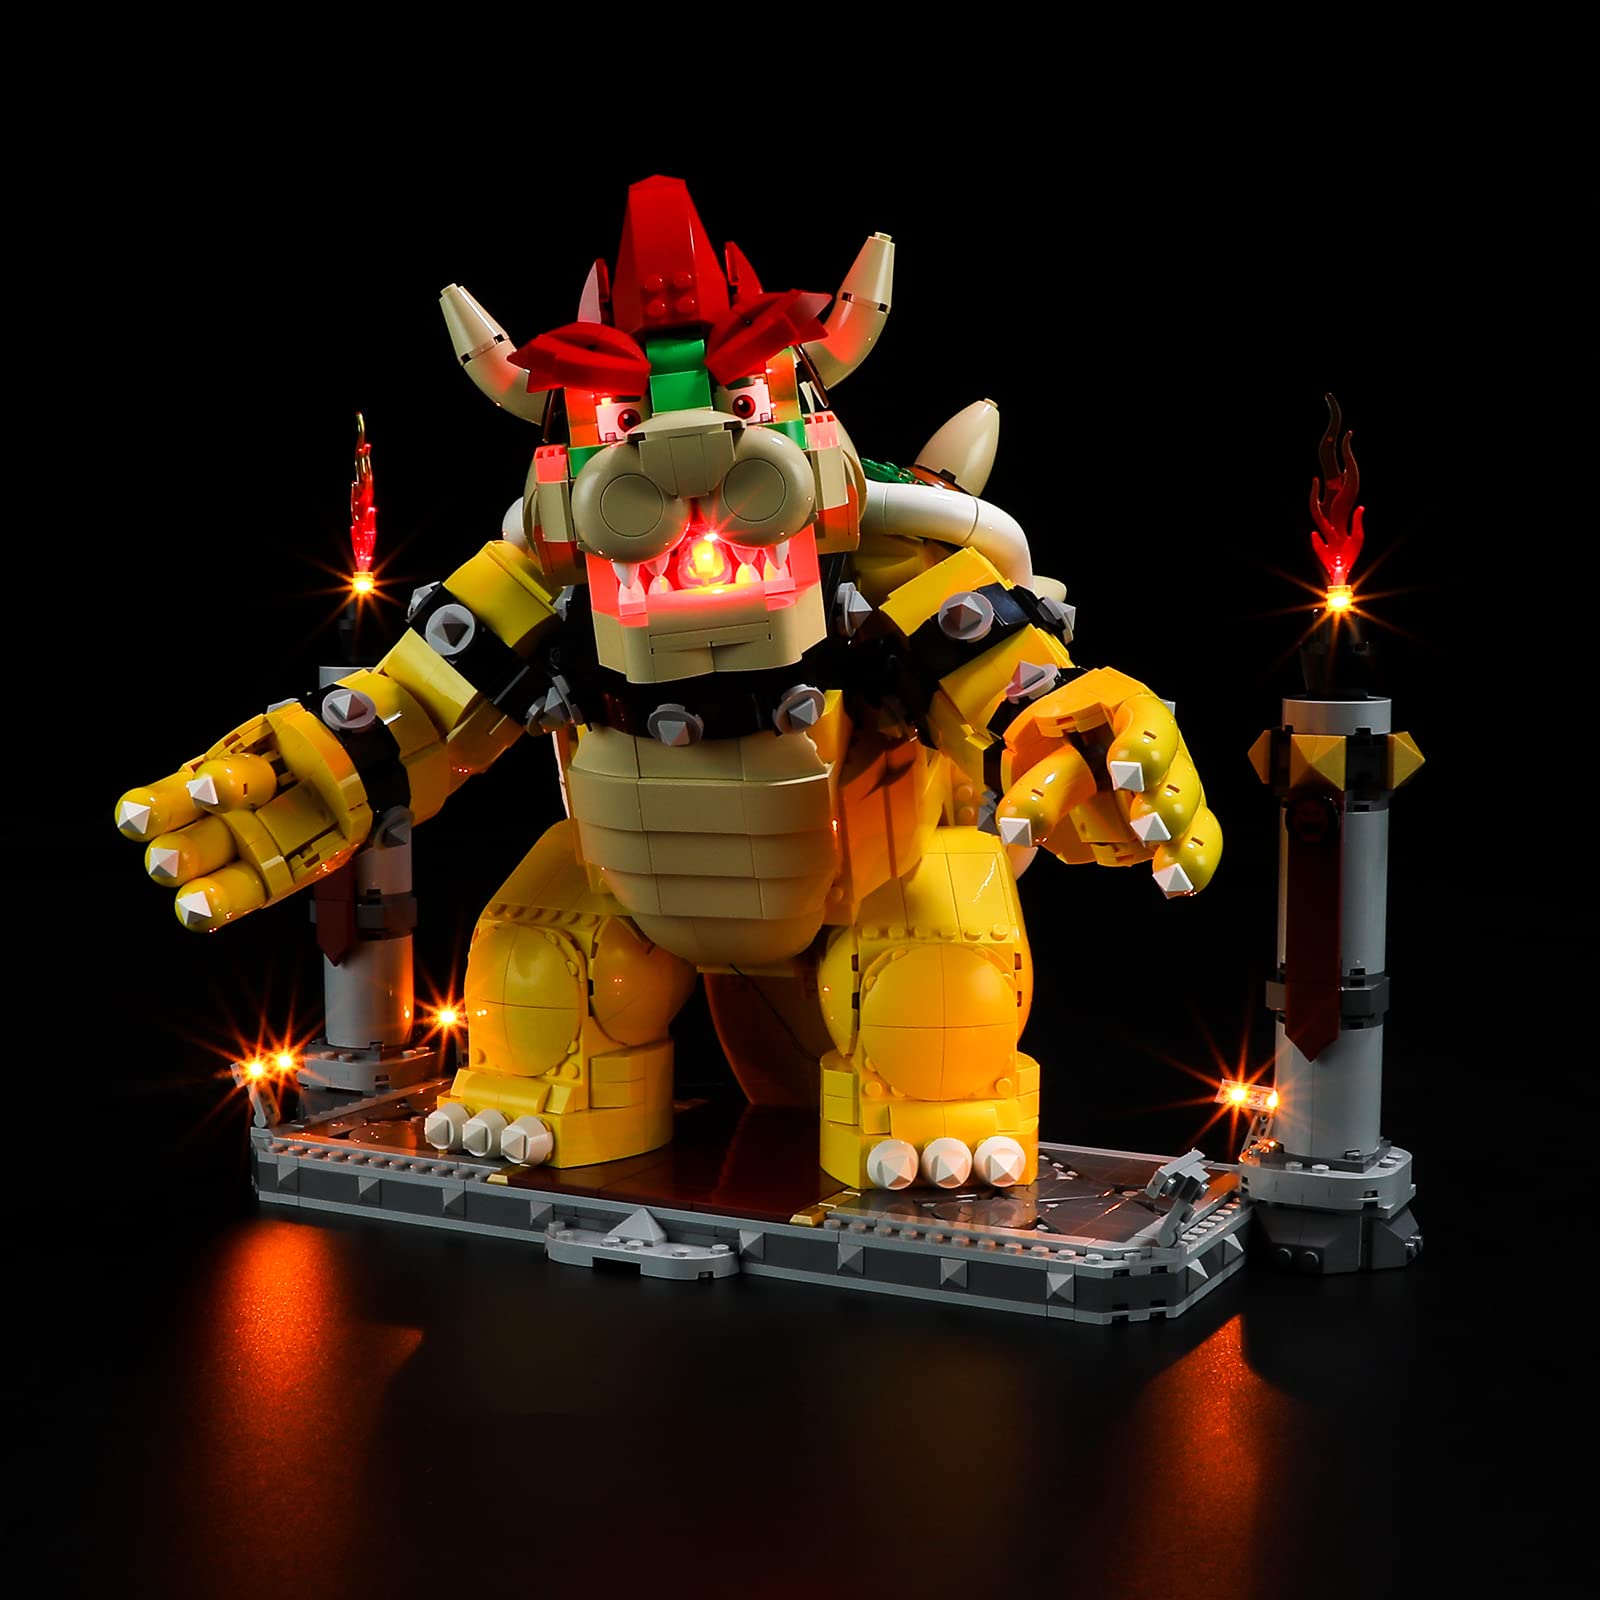 LIGHTAILING Light for Lego-71411 The Mighty-Bowser - Led Lighting Kit Compatible with Lego Building Blocks Model - NOT Included The Model Set